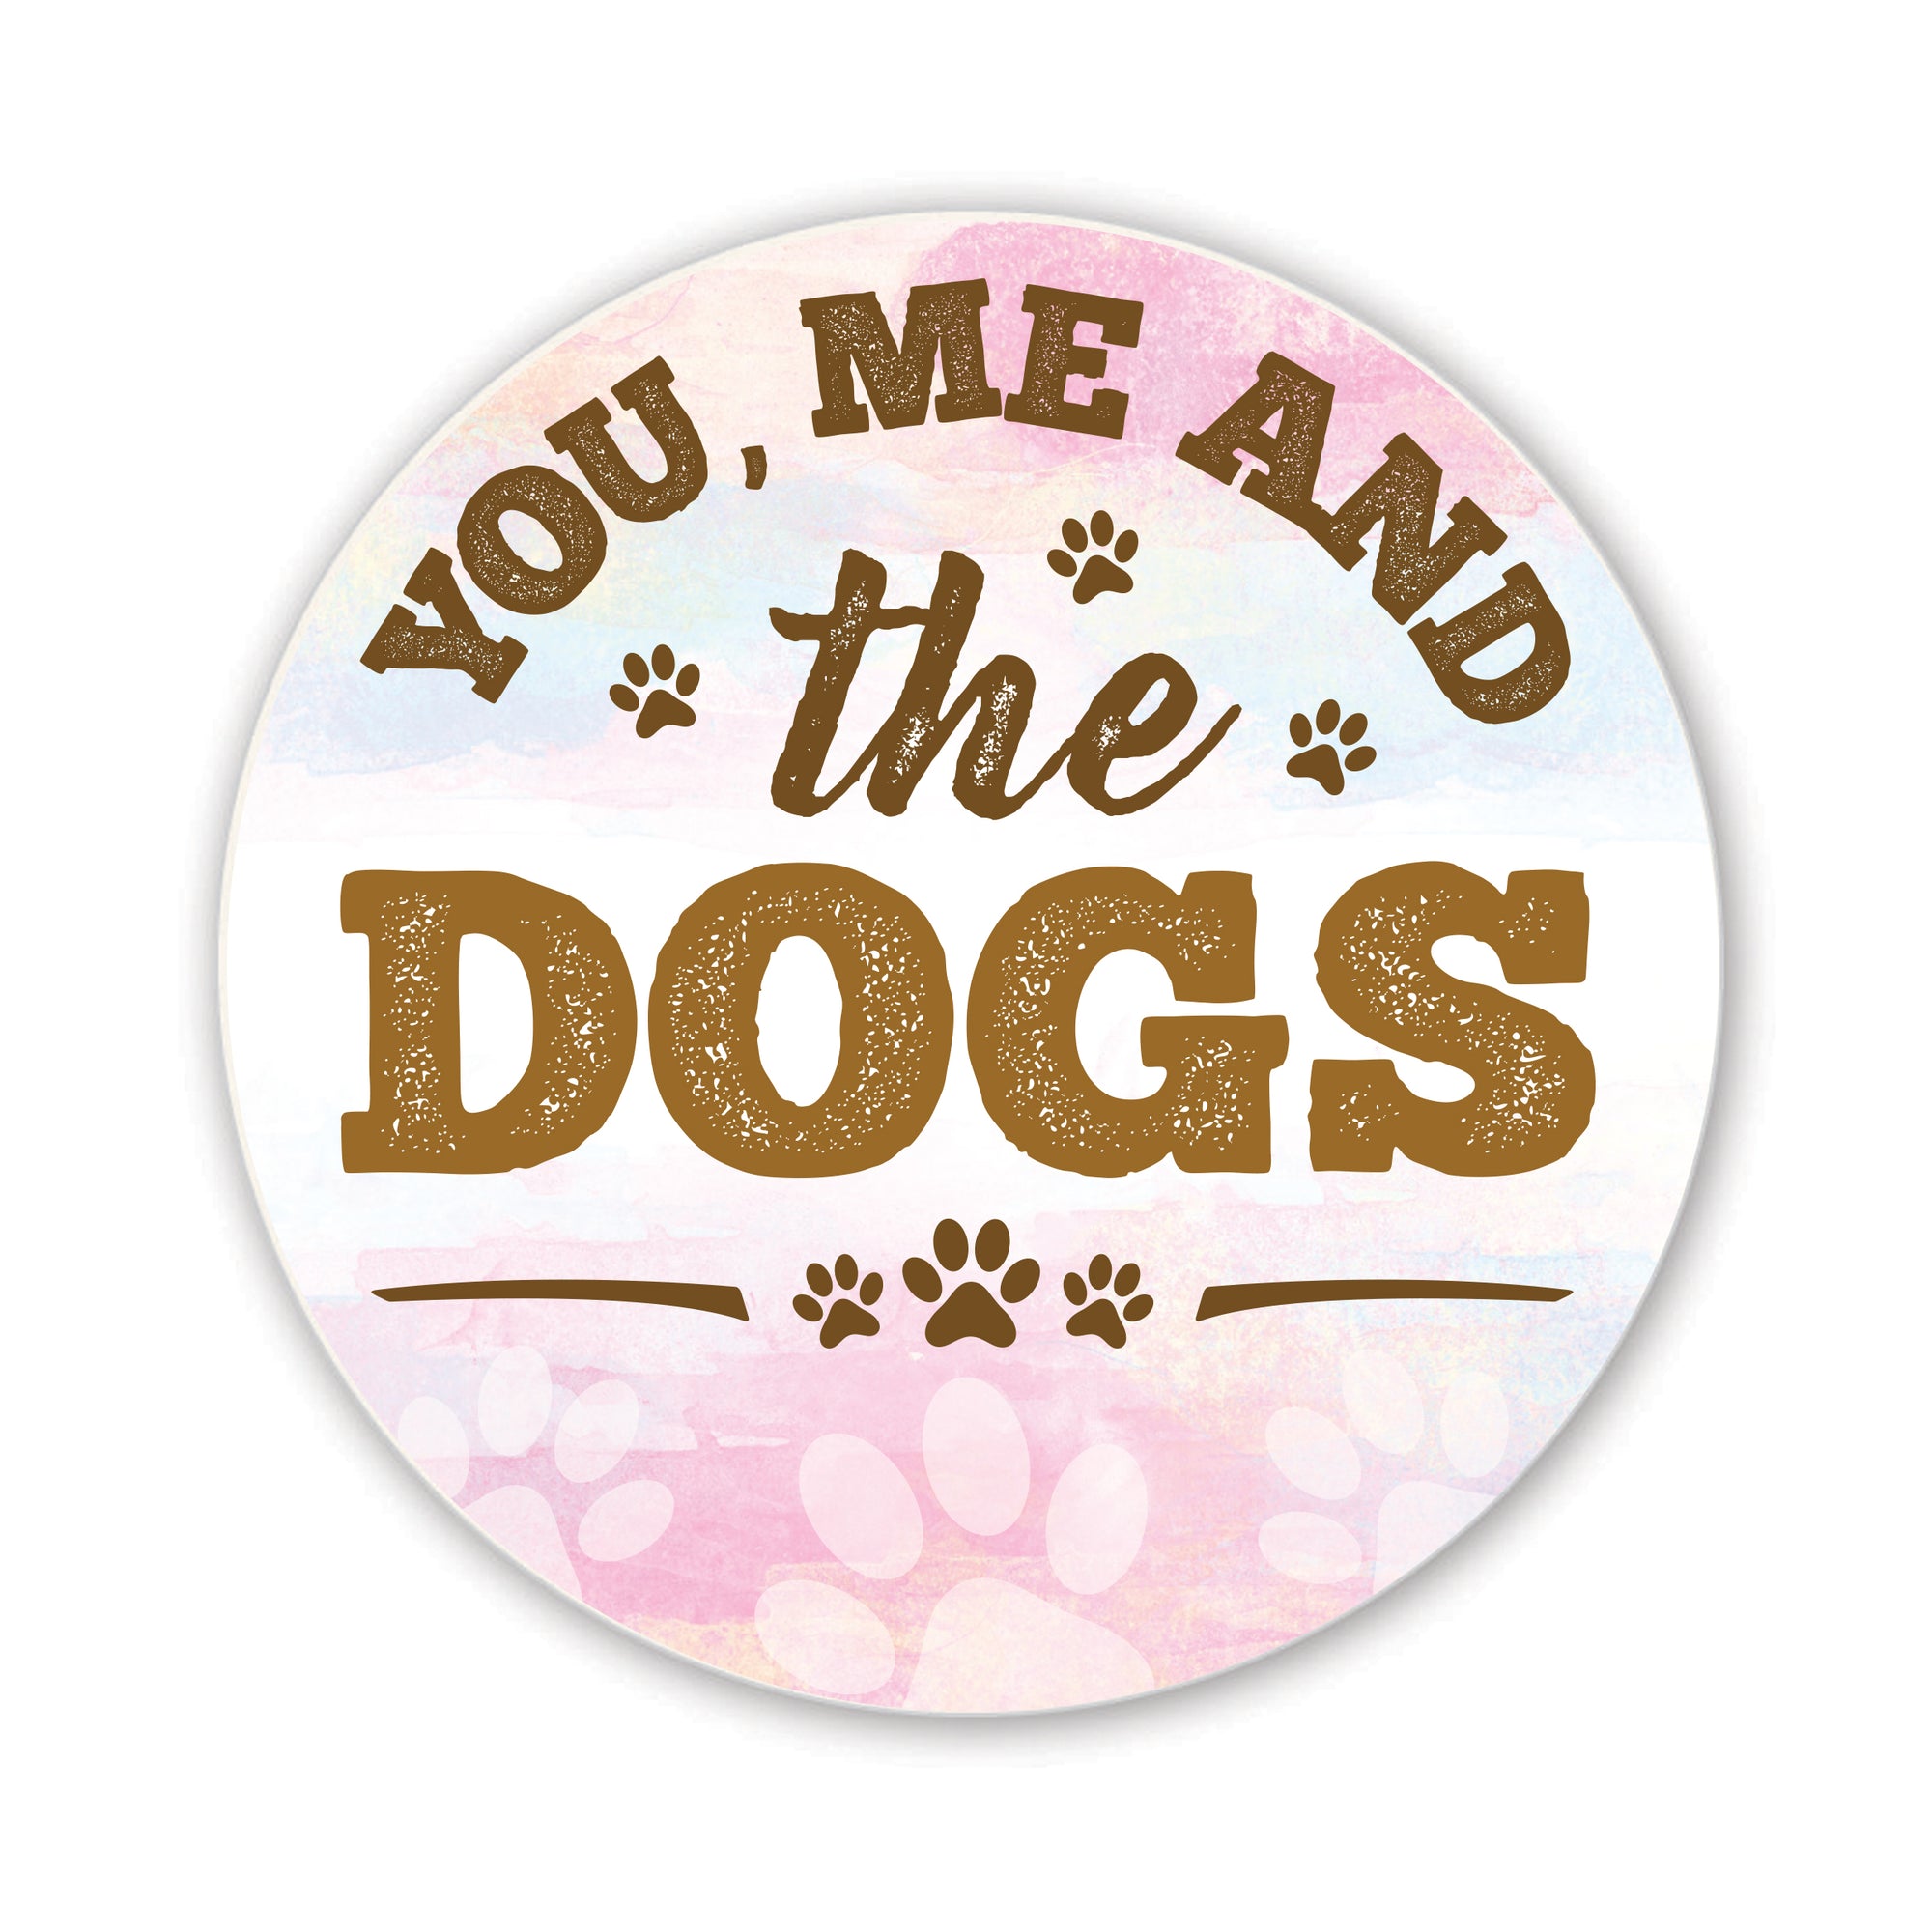 Refrigerator Magnet Perfect Gift Idea For Pet Owners - You Me & The Dogs